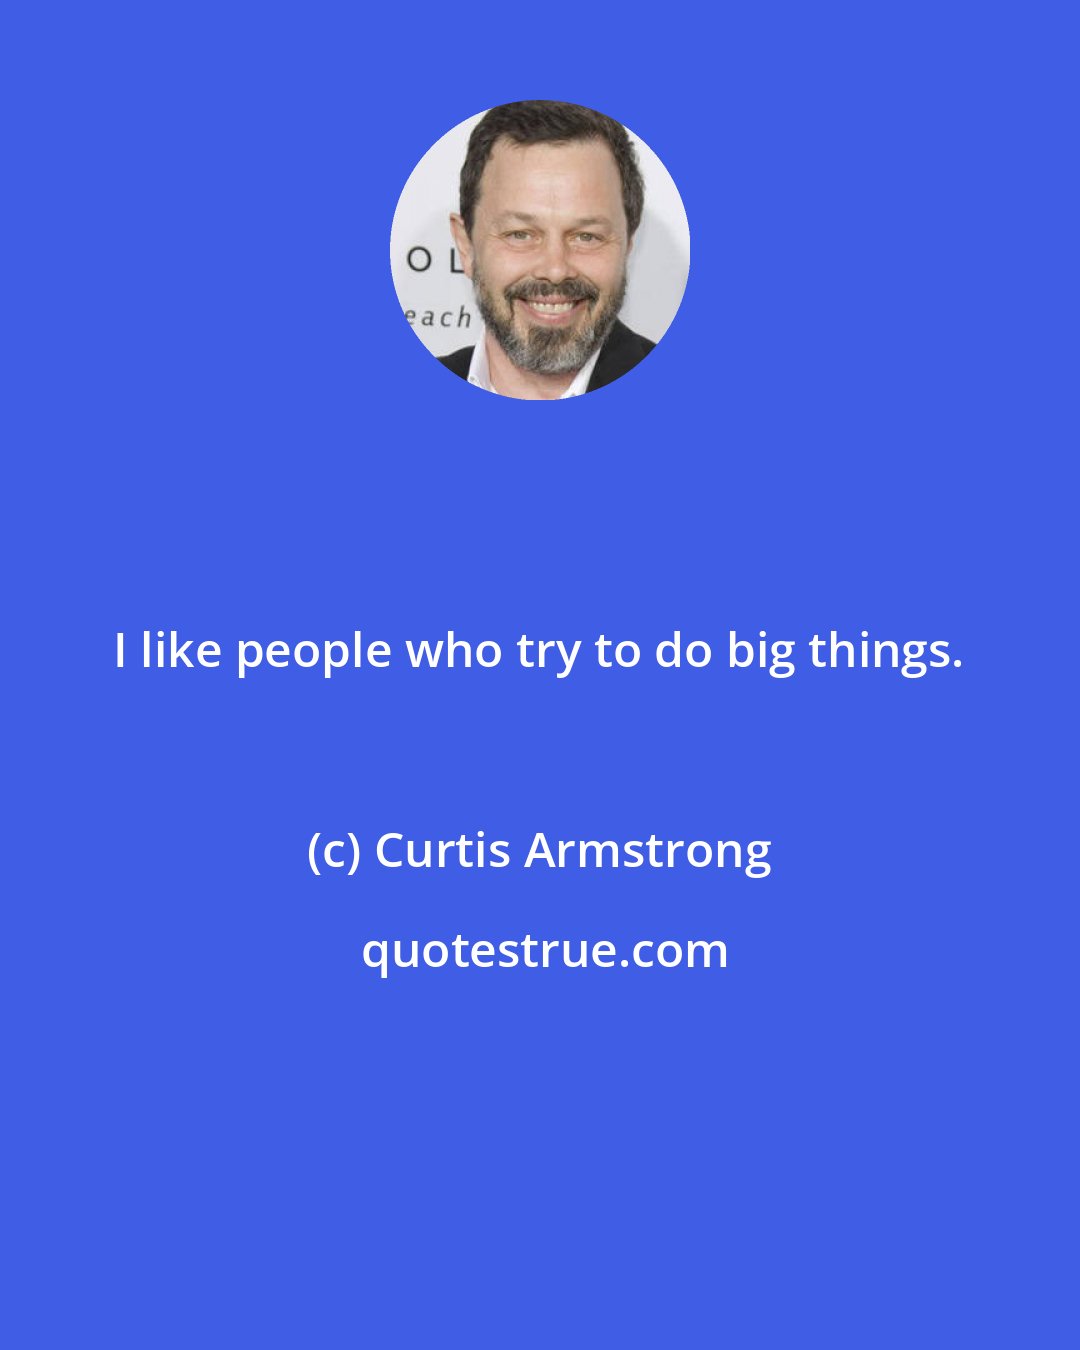 Curtis Armstrong: I like people who try to do big things.